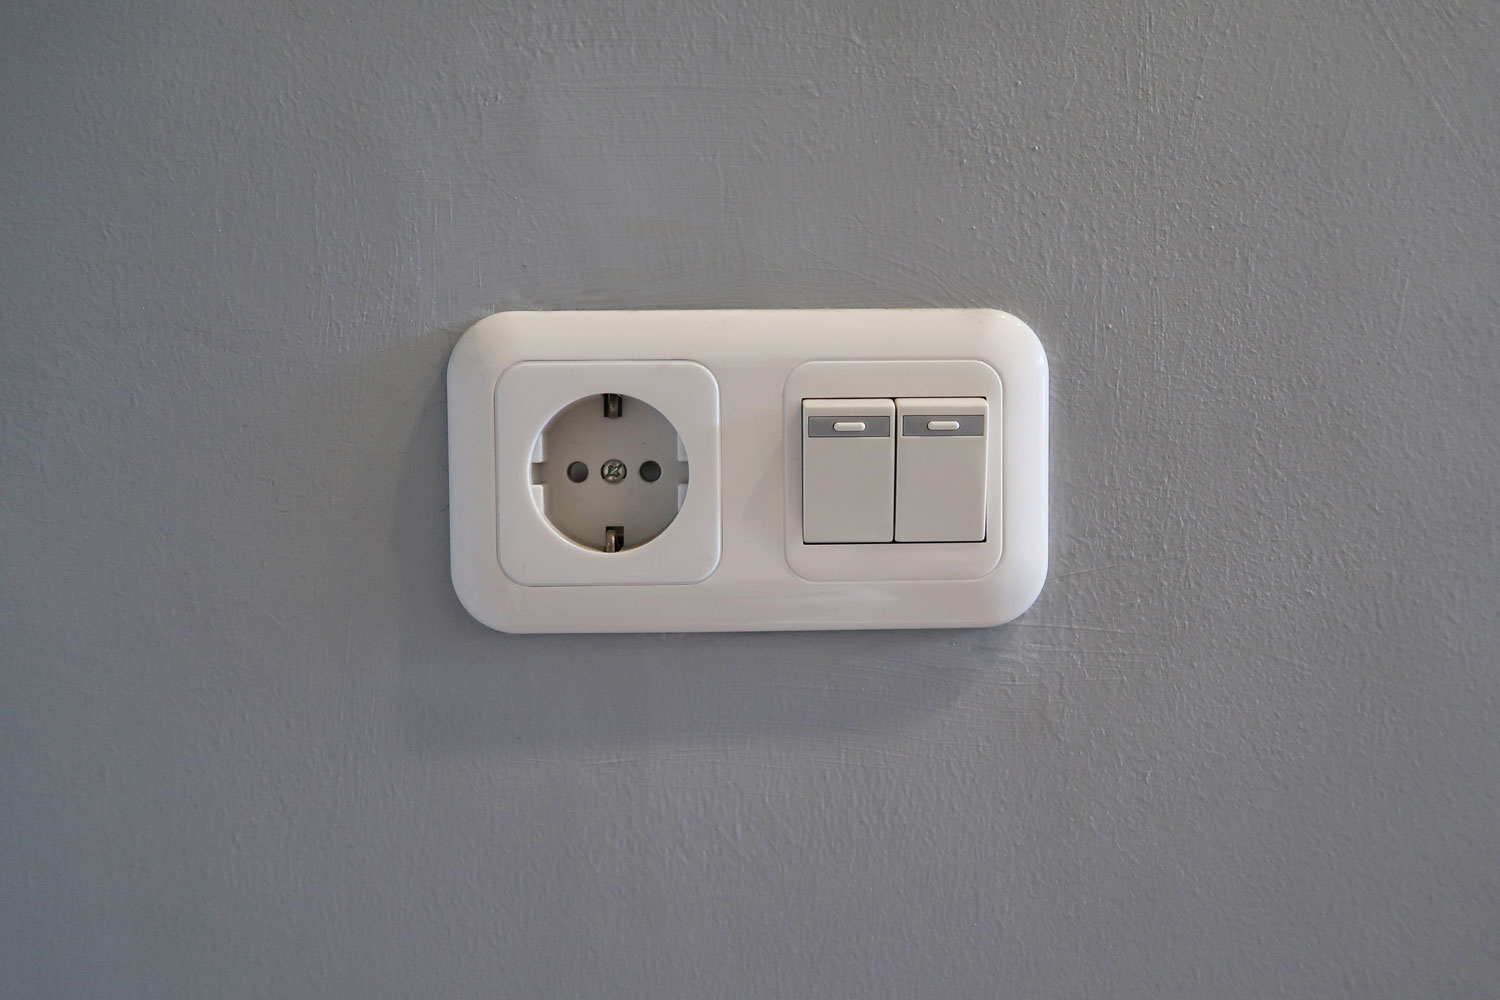 An efficient plug and switch installed on the wall